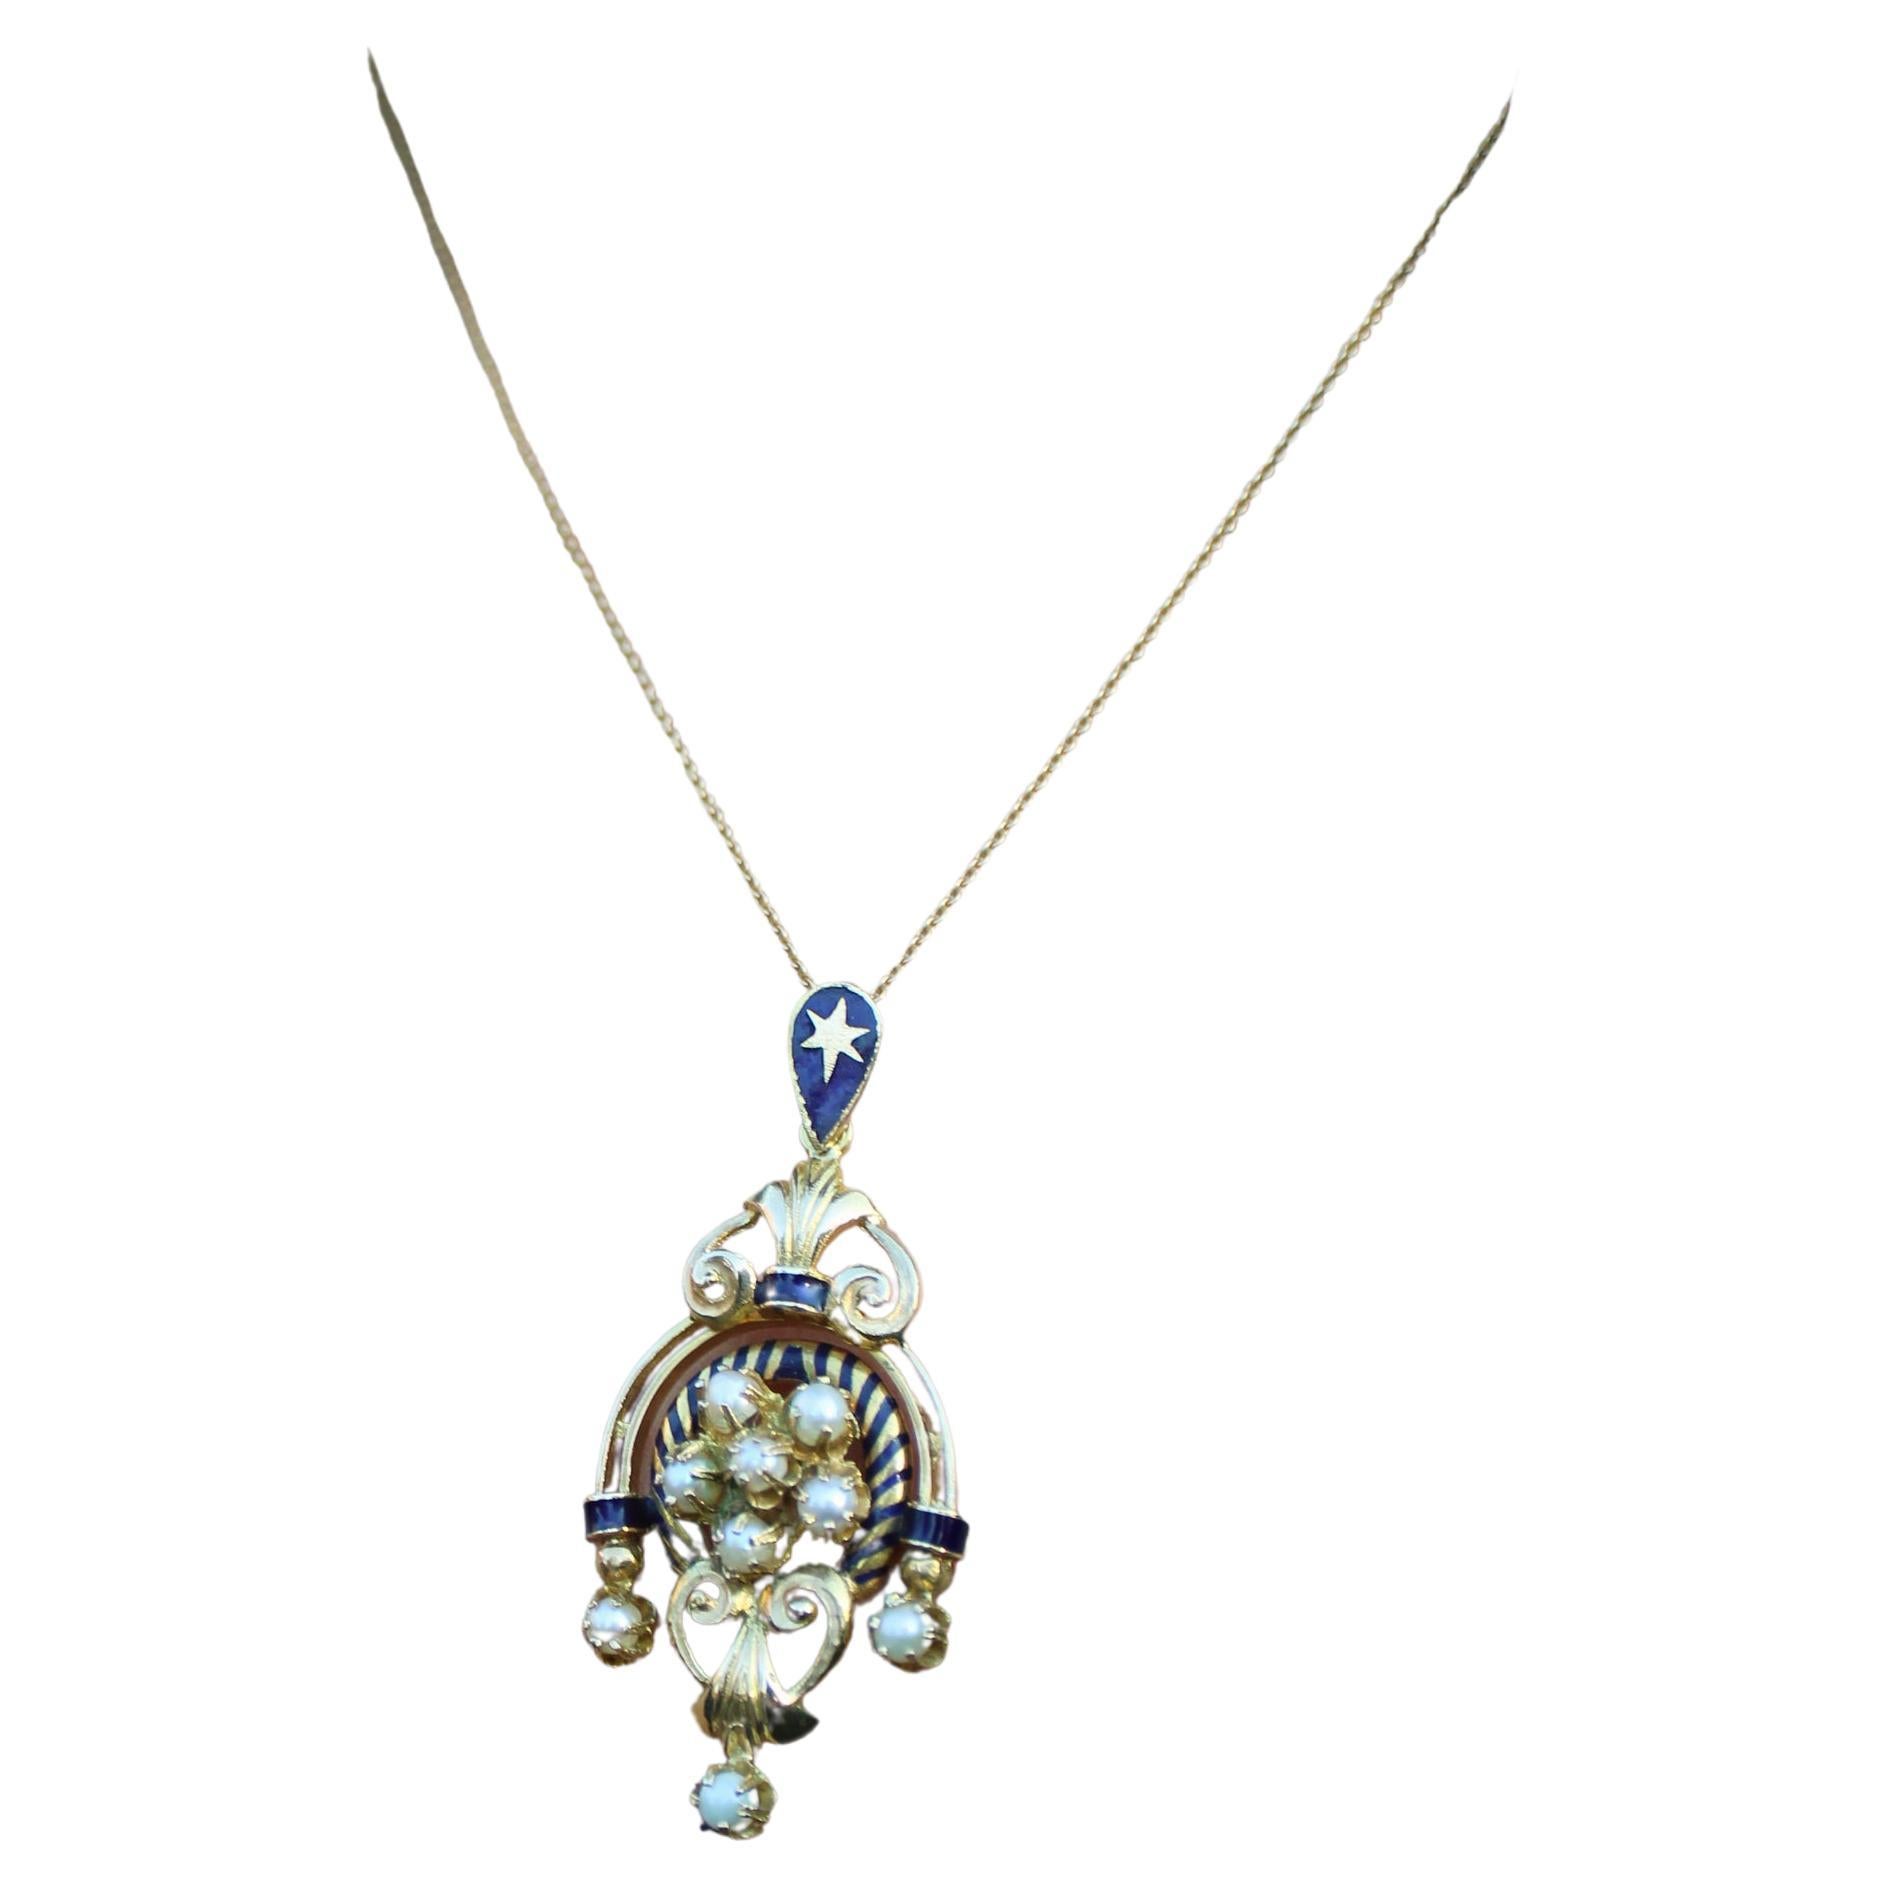 Vintage Continental 14k Gold Enamel Lavalier Pendant with Seed Pearls For Sale